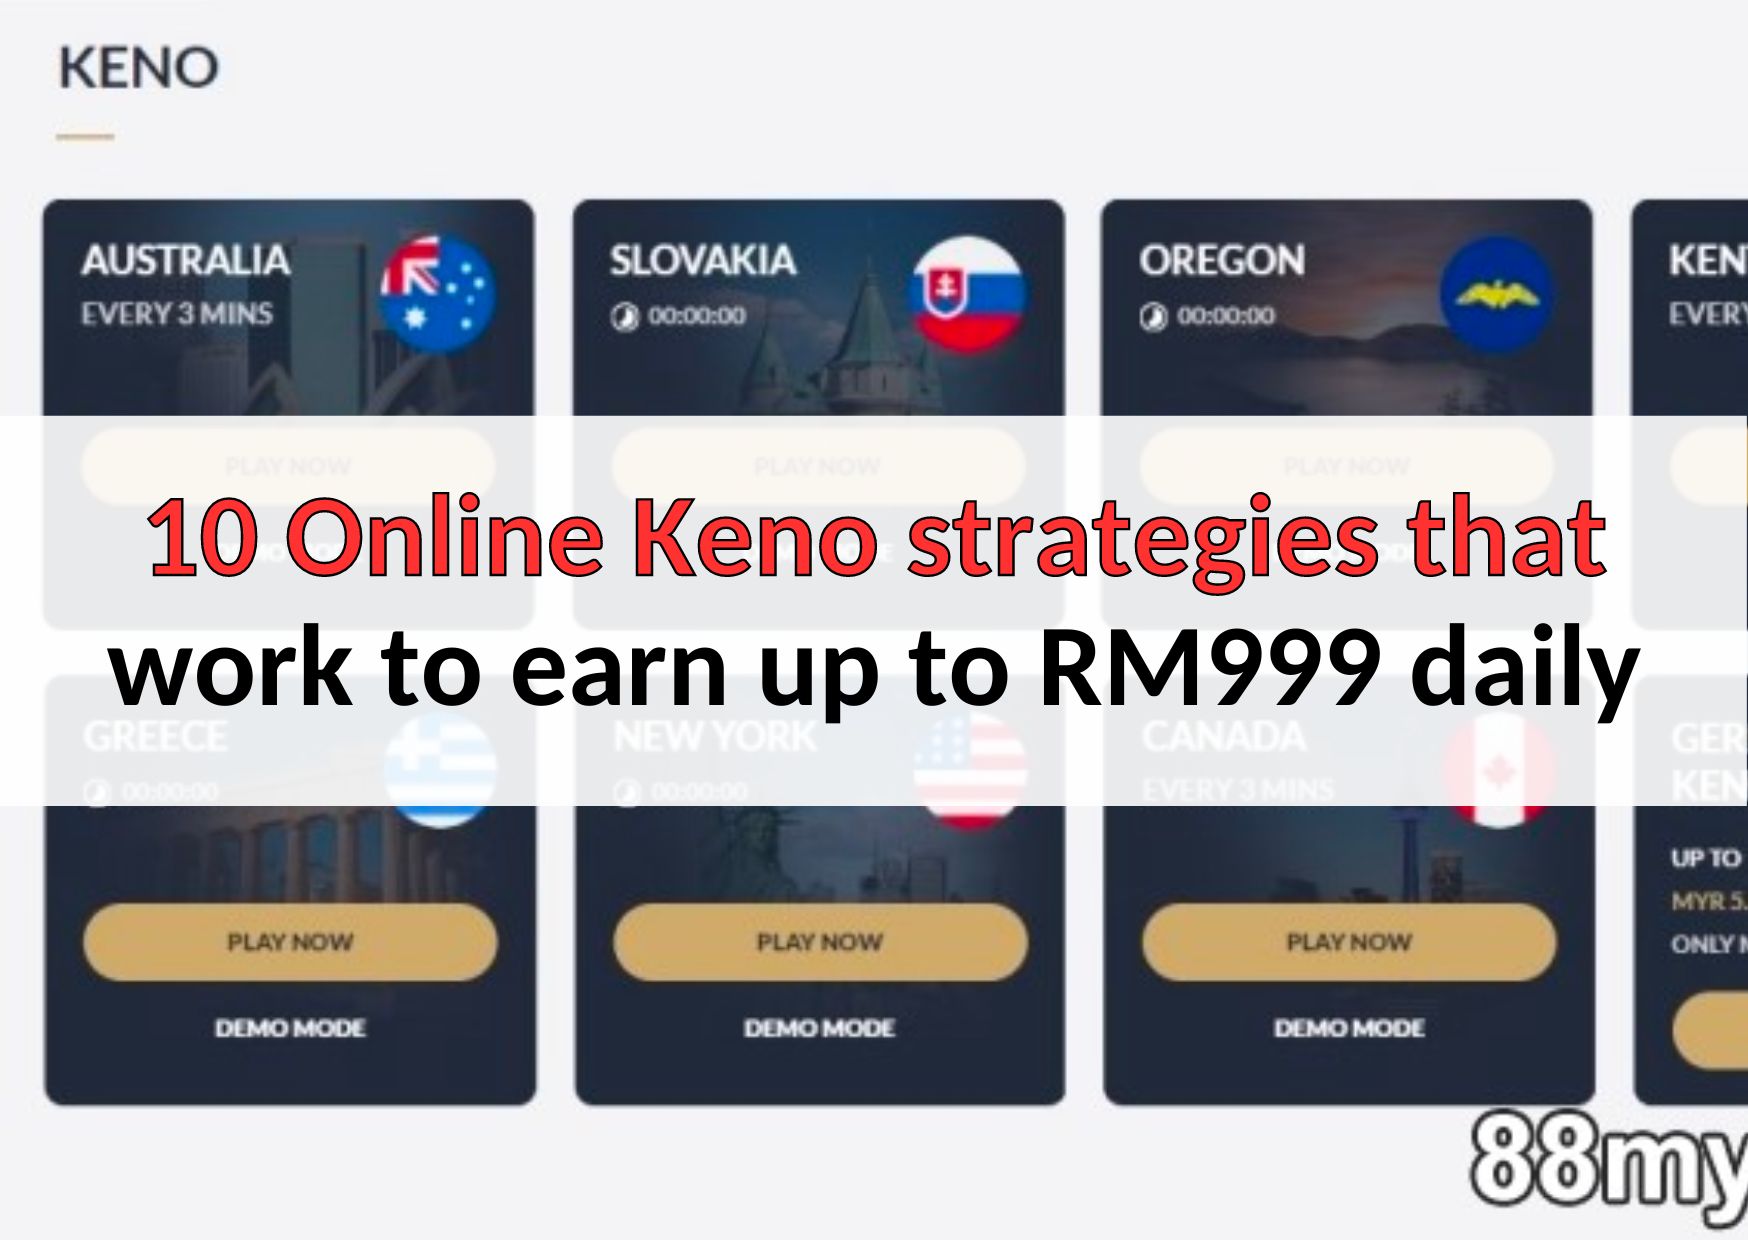 10 Online Keno strategies that work to earn up to RM999 daily